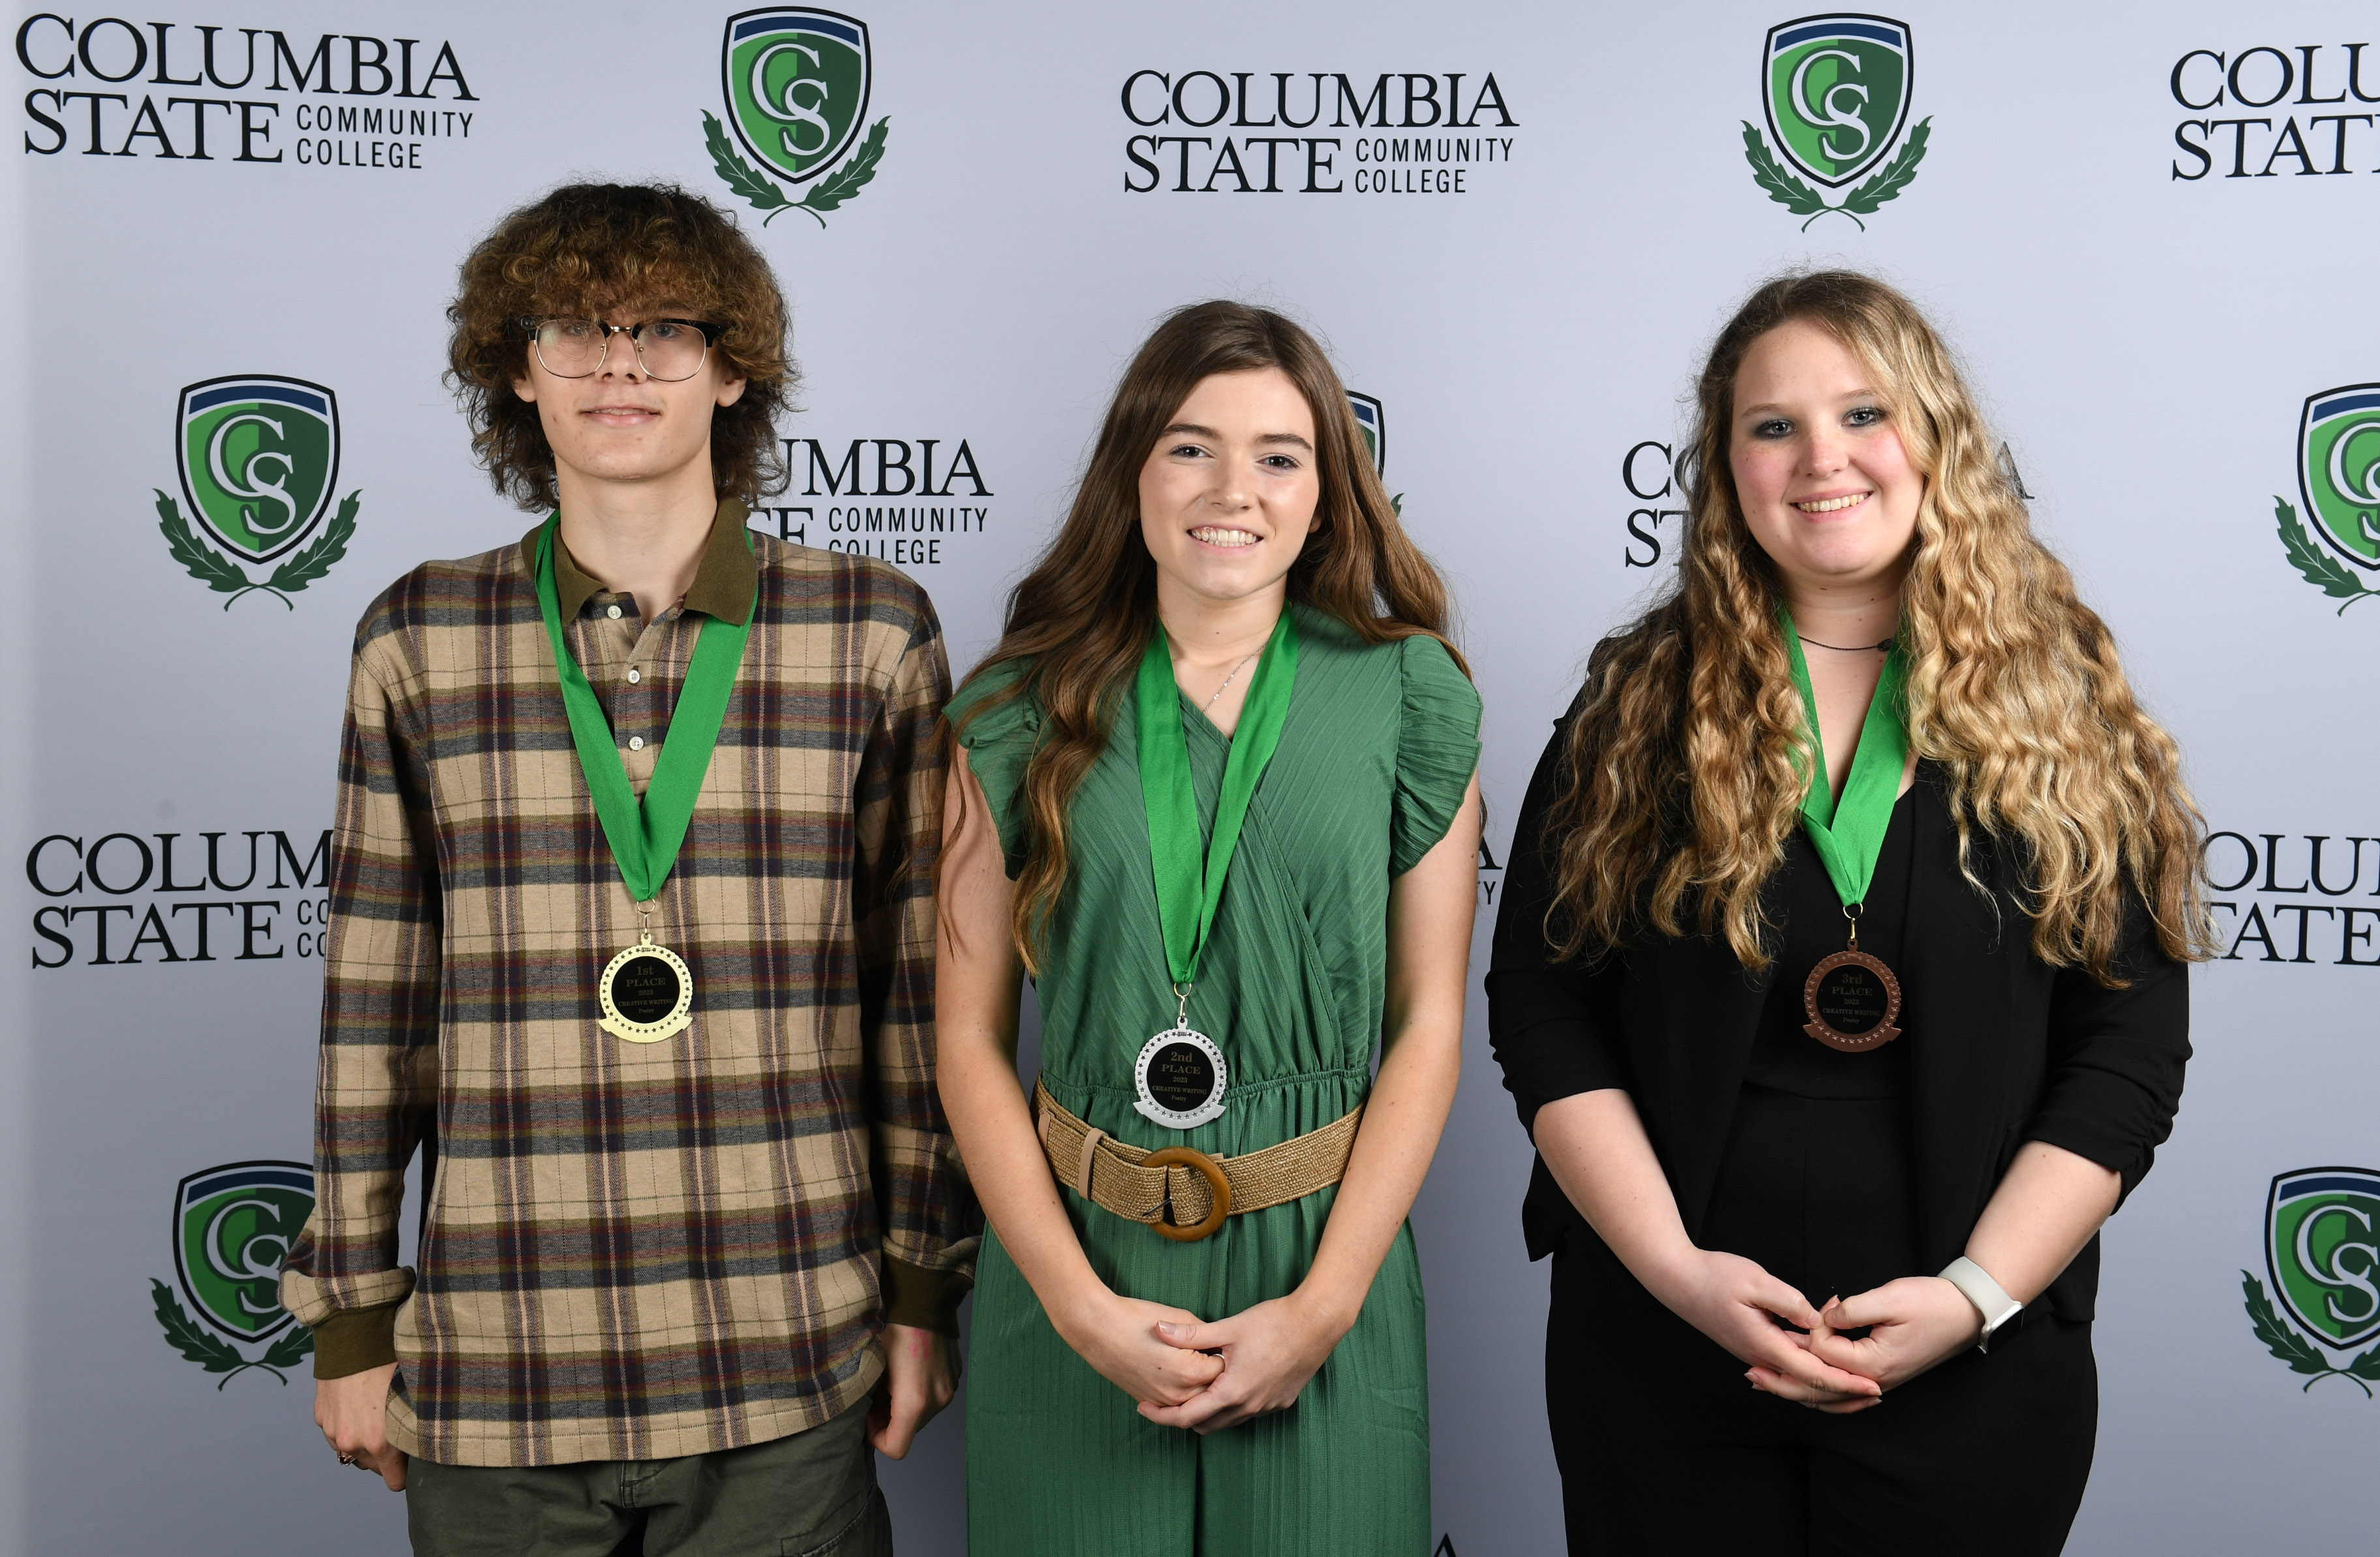 Creative Writing – Poetry Winners (left to right): First place winner, Calen Hood of Spring Hill High School; second place winner, Toni Calton of Collinwood High School; and third place winner, Helayna Garlett of Spring Hill High School.